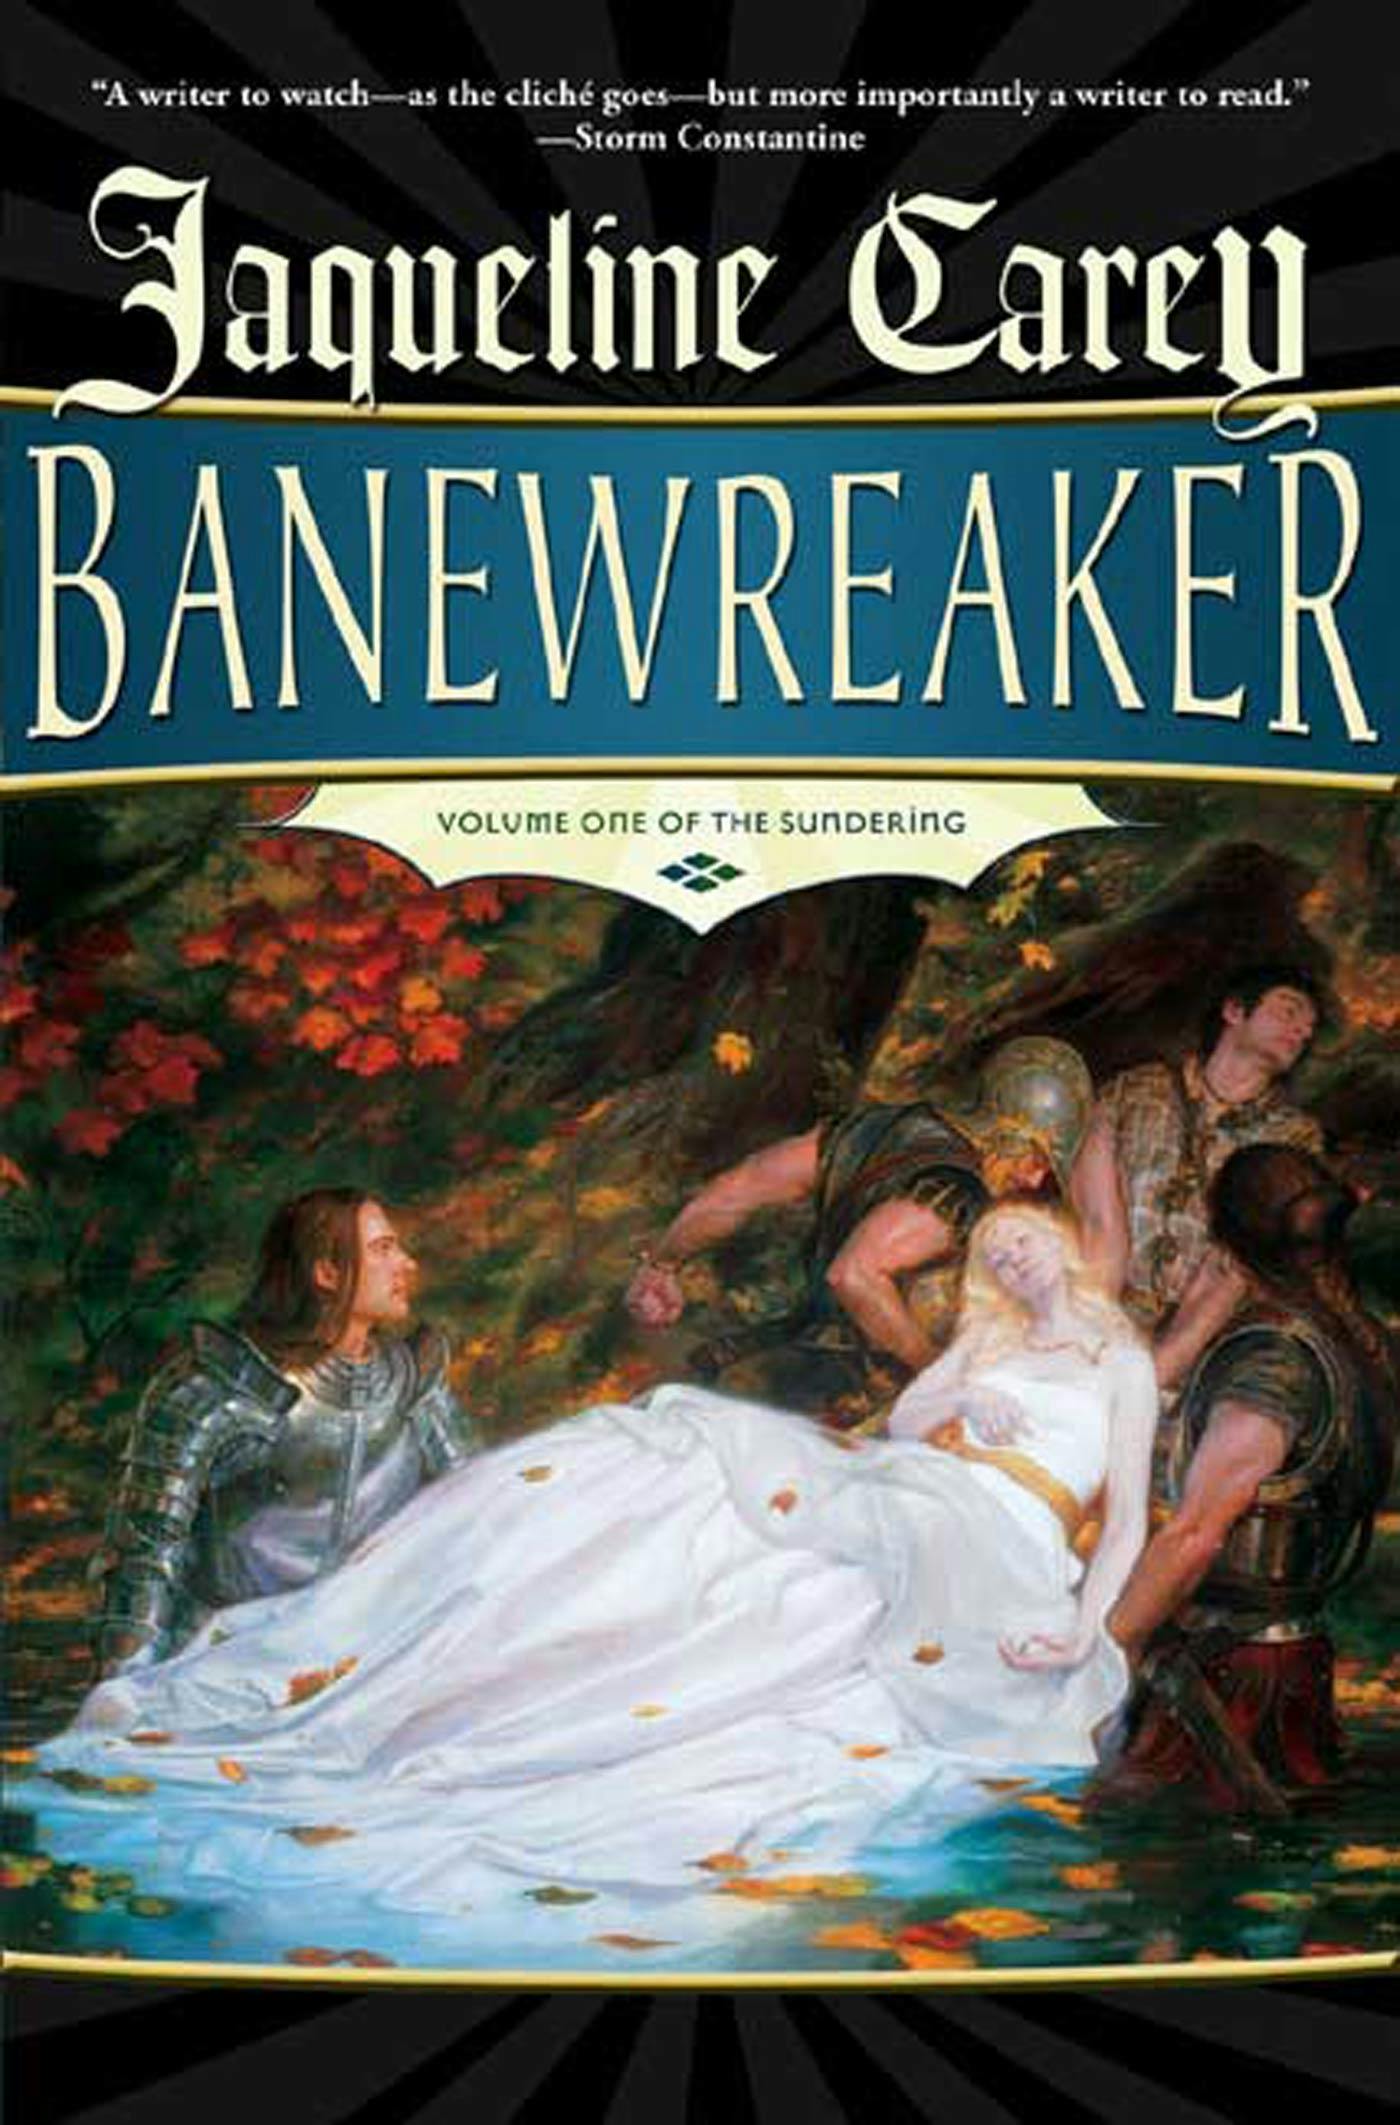 Cover for the book titled as: Banewreaker